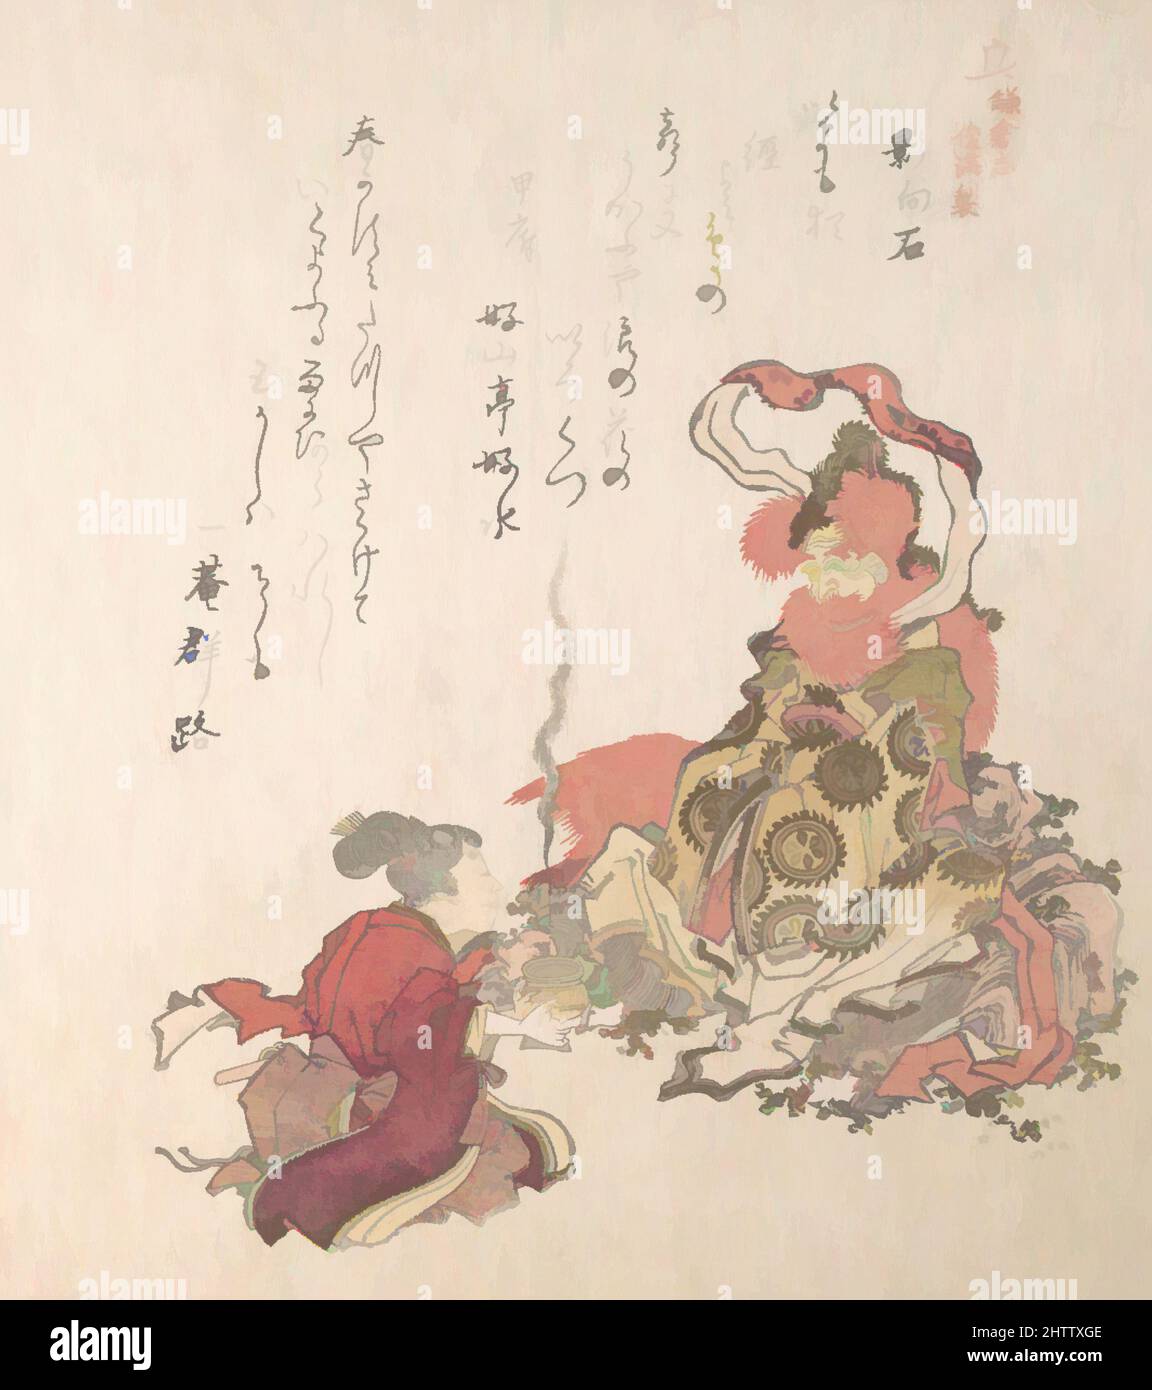 Art inspired by 『春雨集』　摺物帖, Edo period (1615–1868), early to mid-1810s, Japan, Privately published woodblock prints (surimono) mounted in an album; ink and color on paper, 7 7/8 x 7 1/8 in. (20 x 18.1 cm), Prints, Kubo Shunman (Japanese, 1757–1820), Surimono are privately published, Classic works modernized by Artotop with a splash of modernity. Shapes, color and value, eye-catching visual impact on art. Emotions through freedom of artworks in a contemporary way. A timeless message pursuing a wildly creative new direction. Artists turning to the digital medium and creating the Artotop NFT Stock Photo